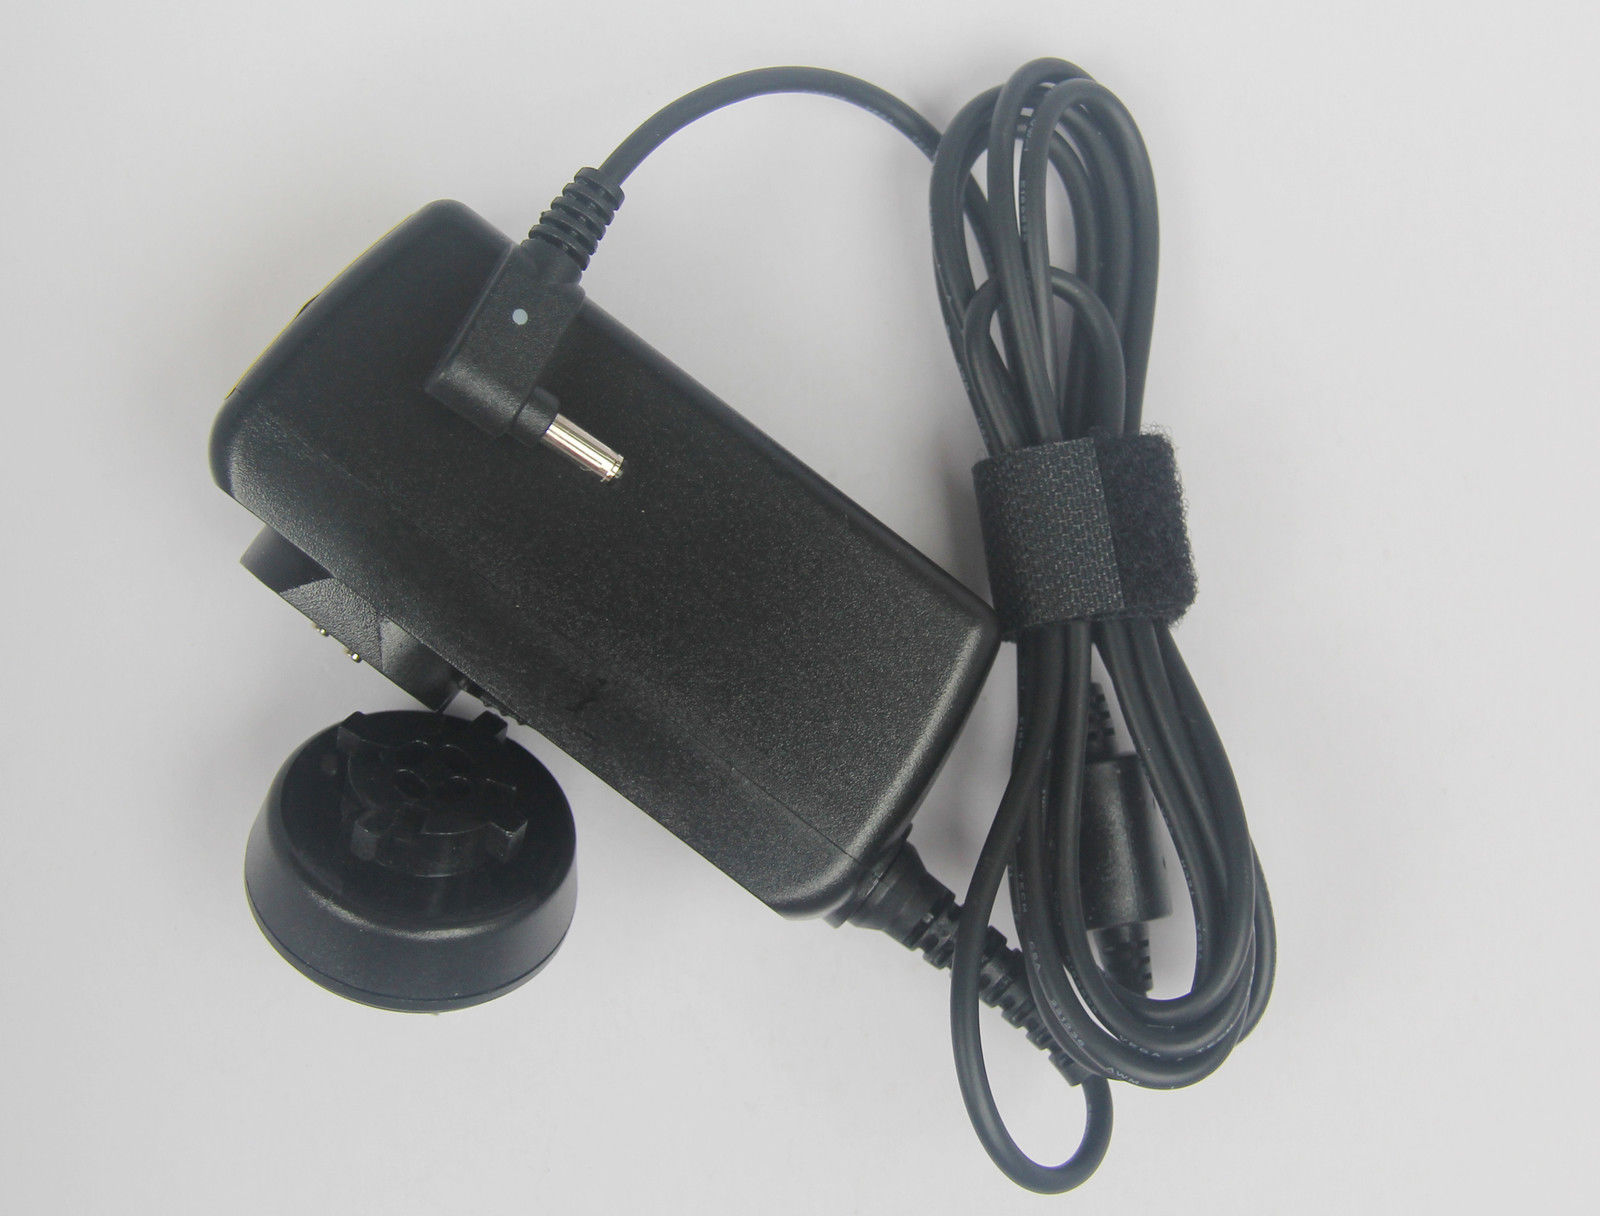 19v 1.75a ASUS PA1330-39 ac adapter laptop charger for Asus E403S E403SA notebook PC